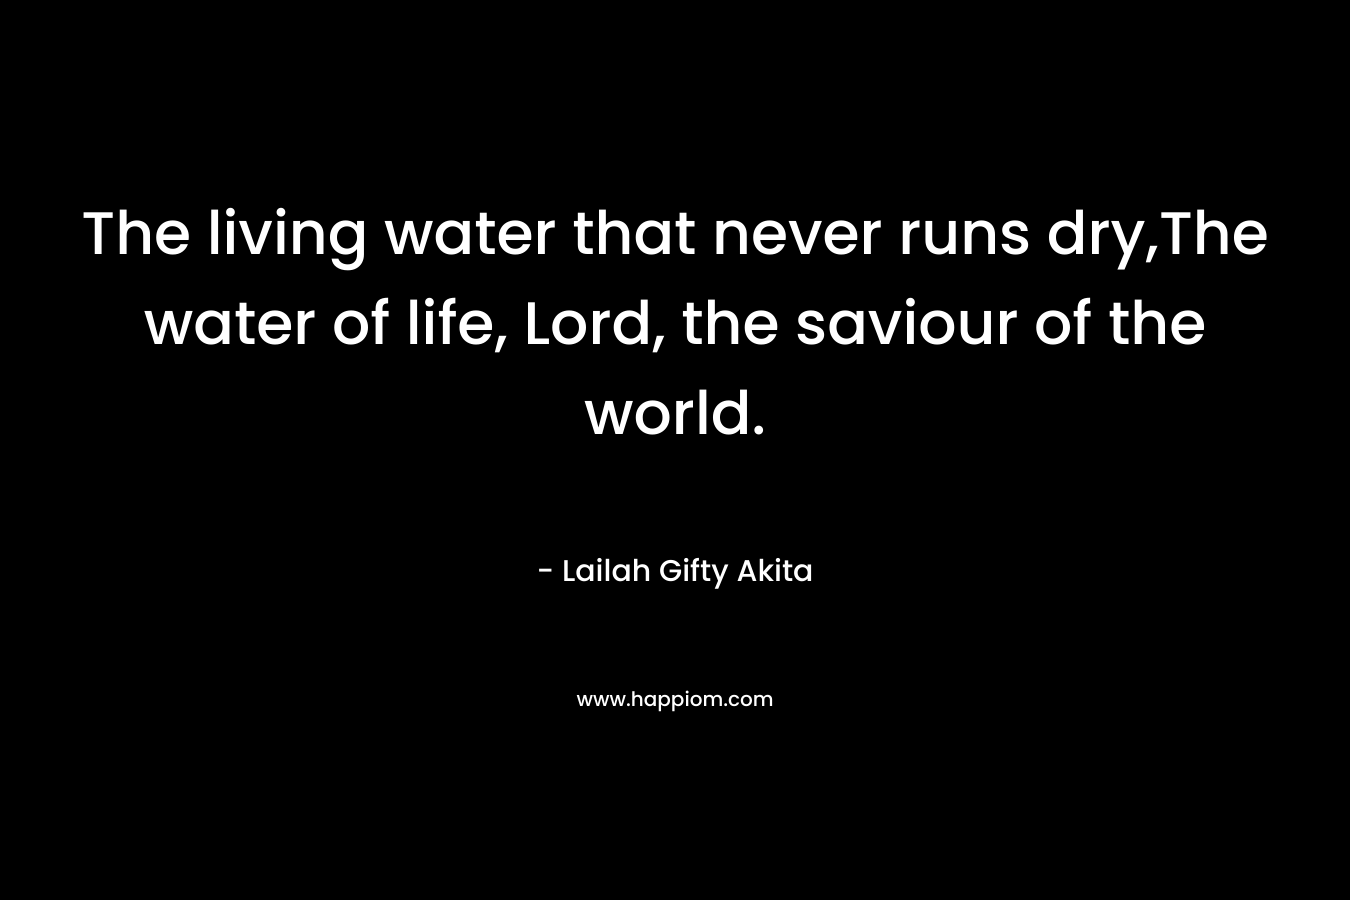 The living water that never runs dry,The water of life, Lord, the saviour of the world. – Lailah Gifty Akita